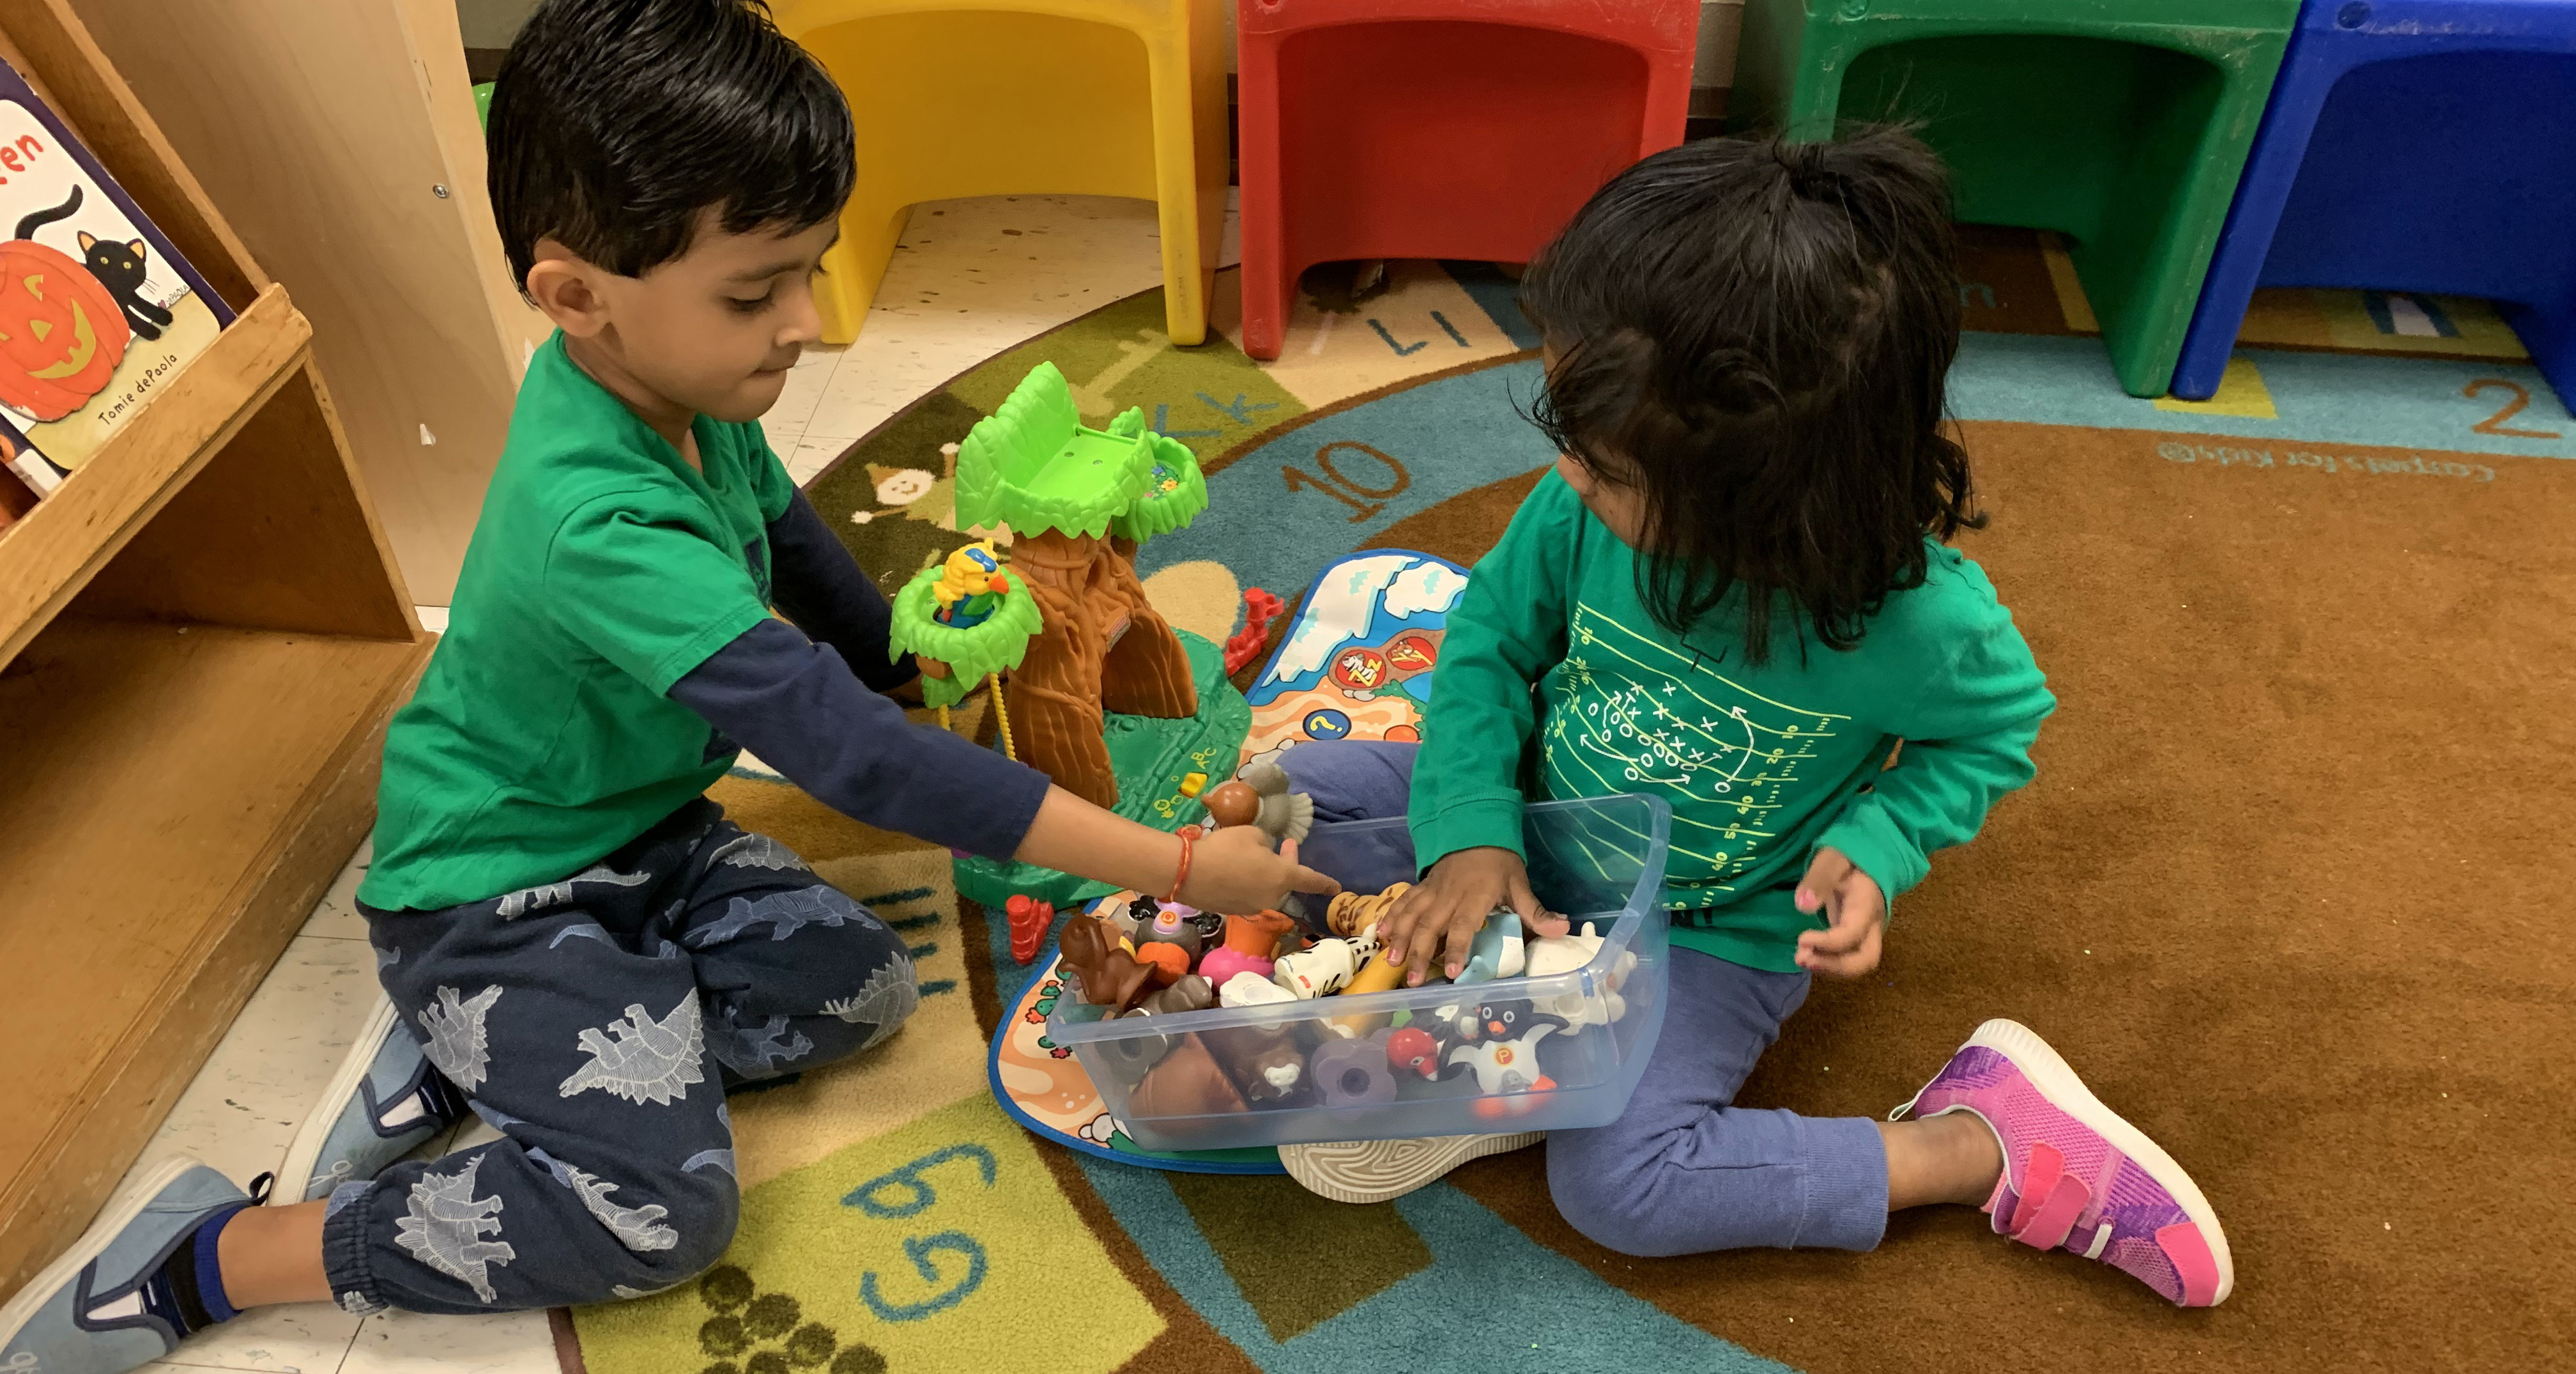 Two students playing with a variety of plastic toys